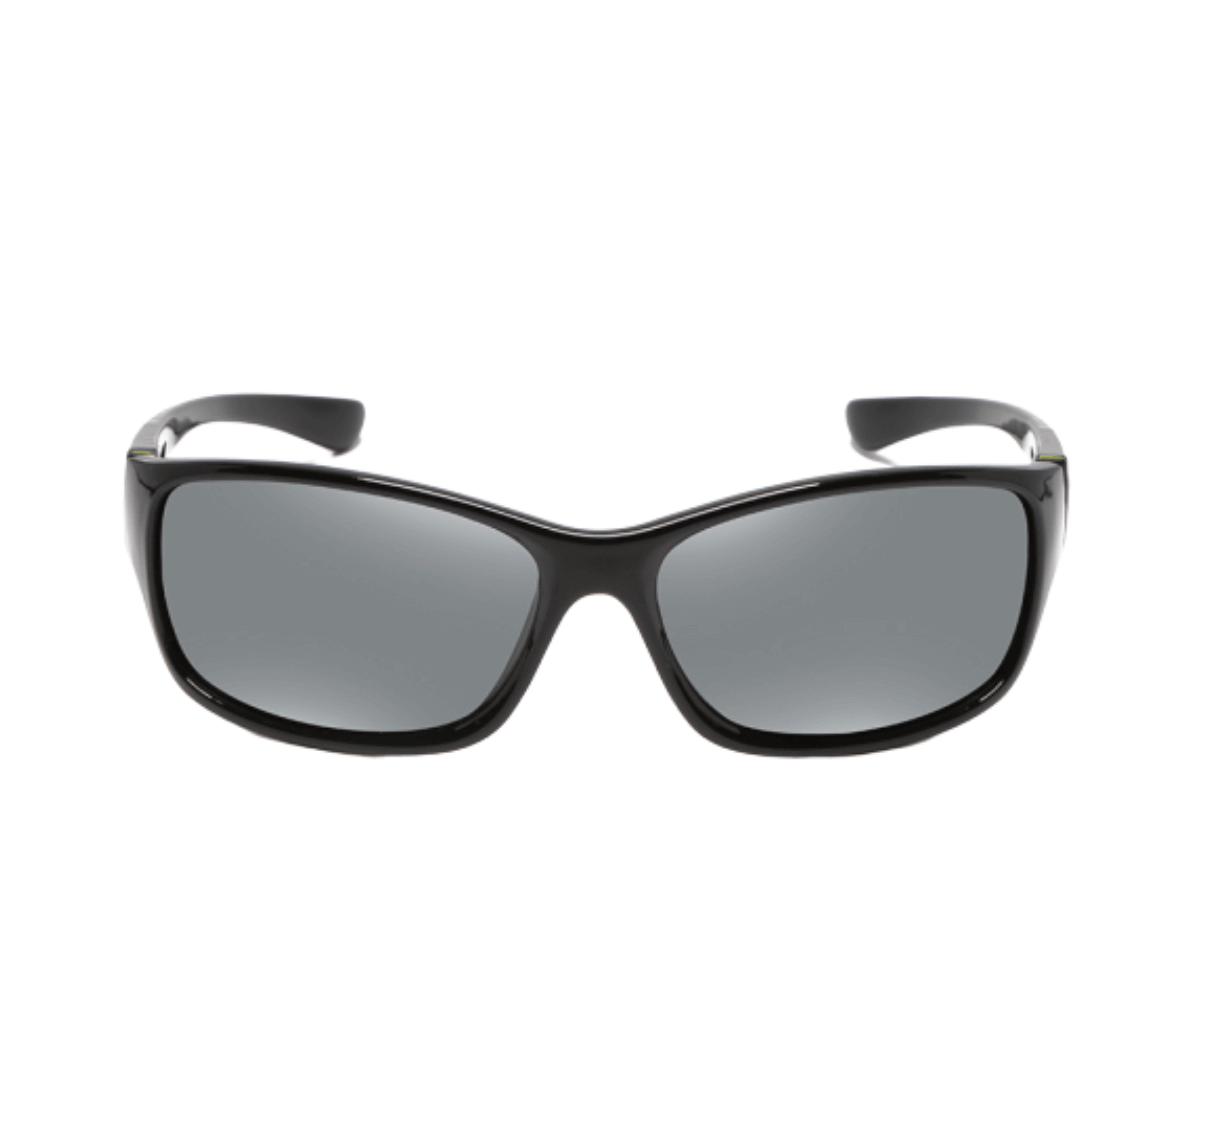 Sports Sunglasses Manufacturers - Sunglasses Supplier China_Motorcycle Sunglasses